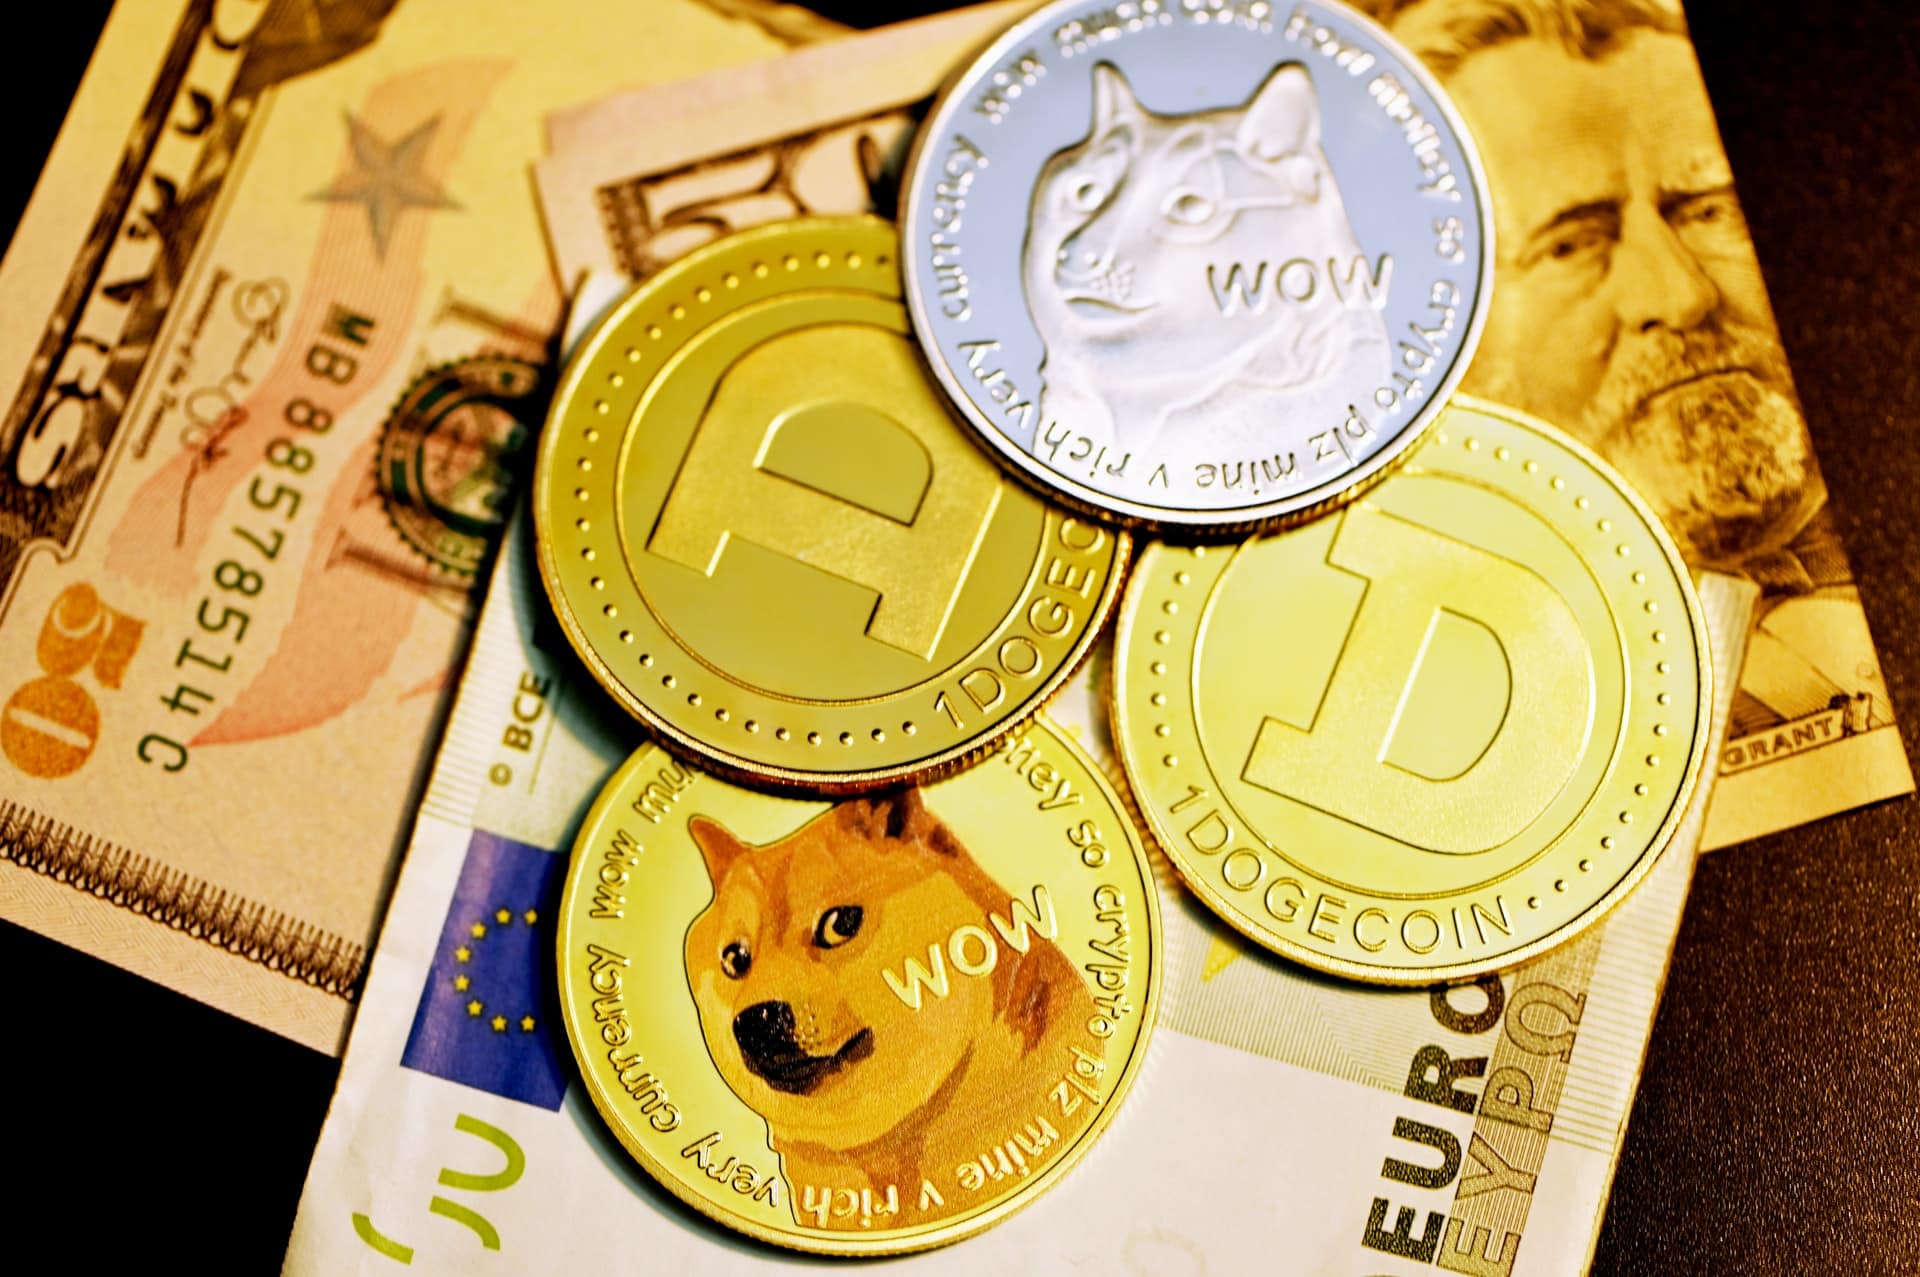 What is Dogecoin?